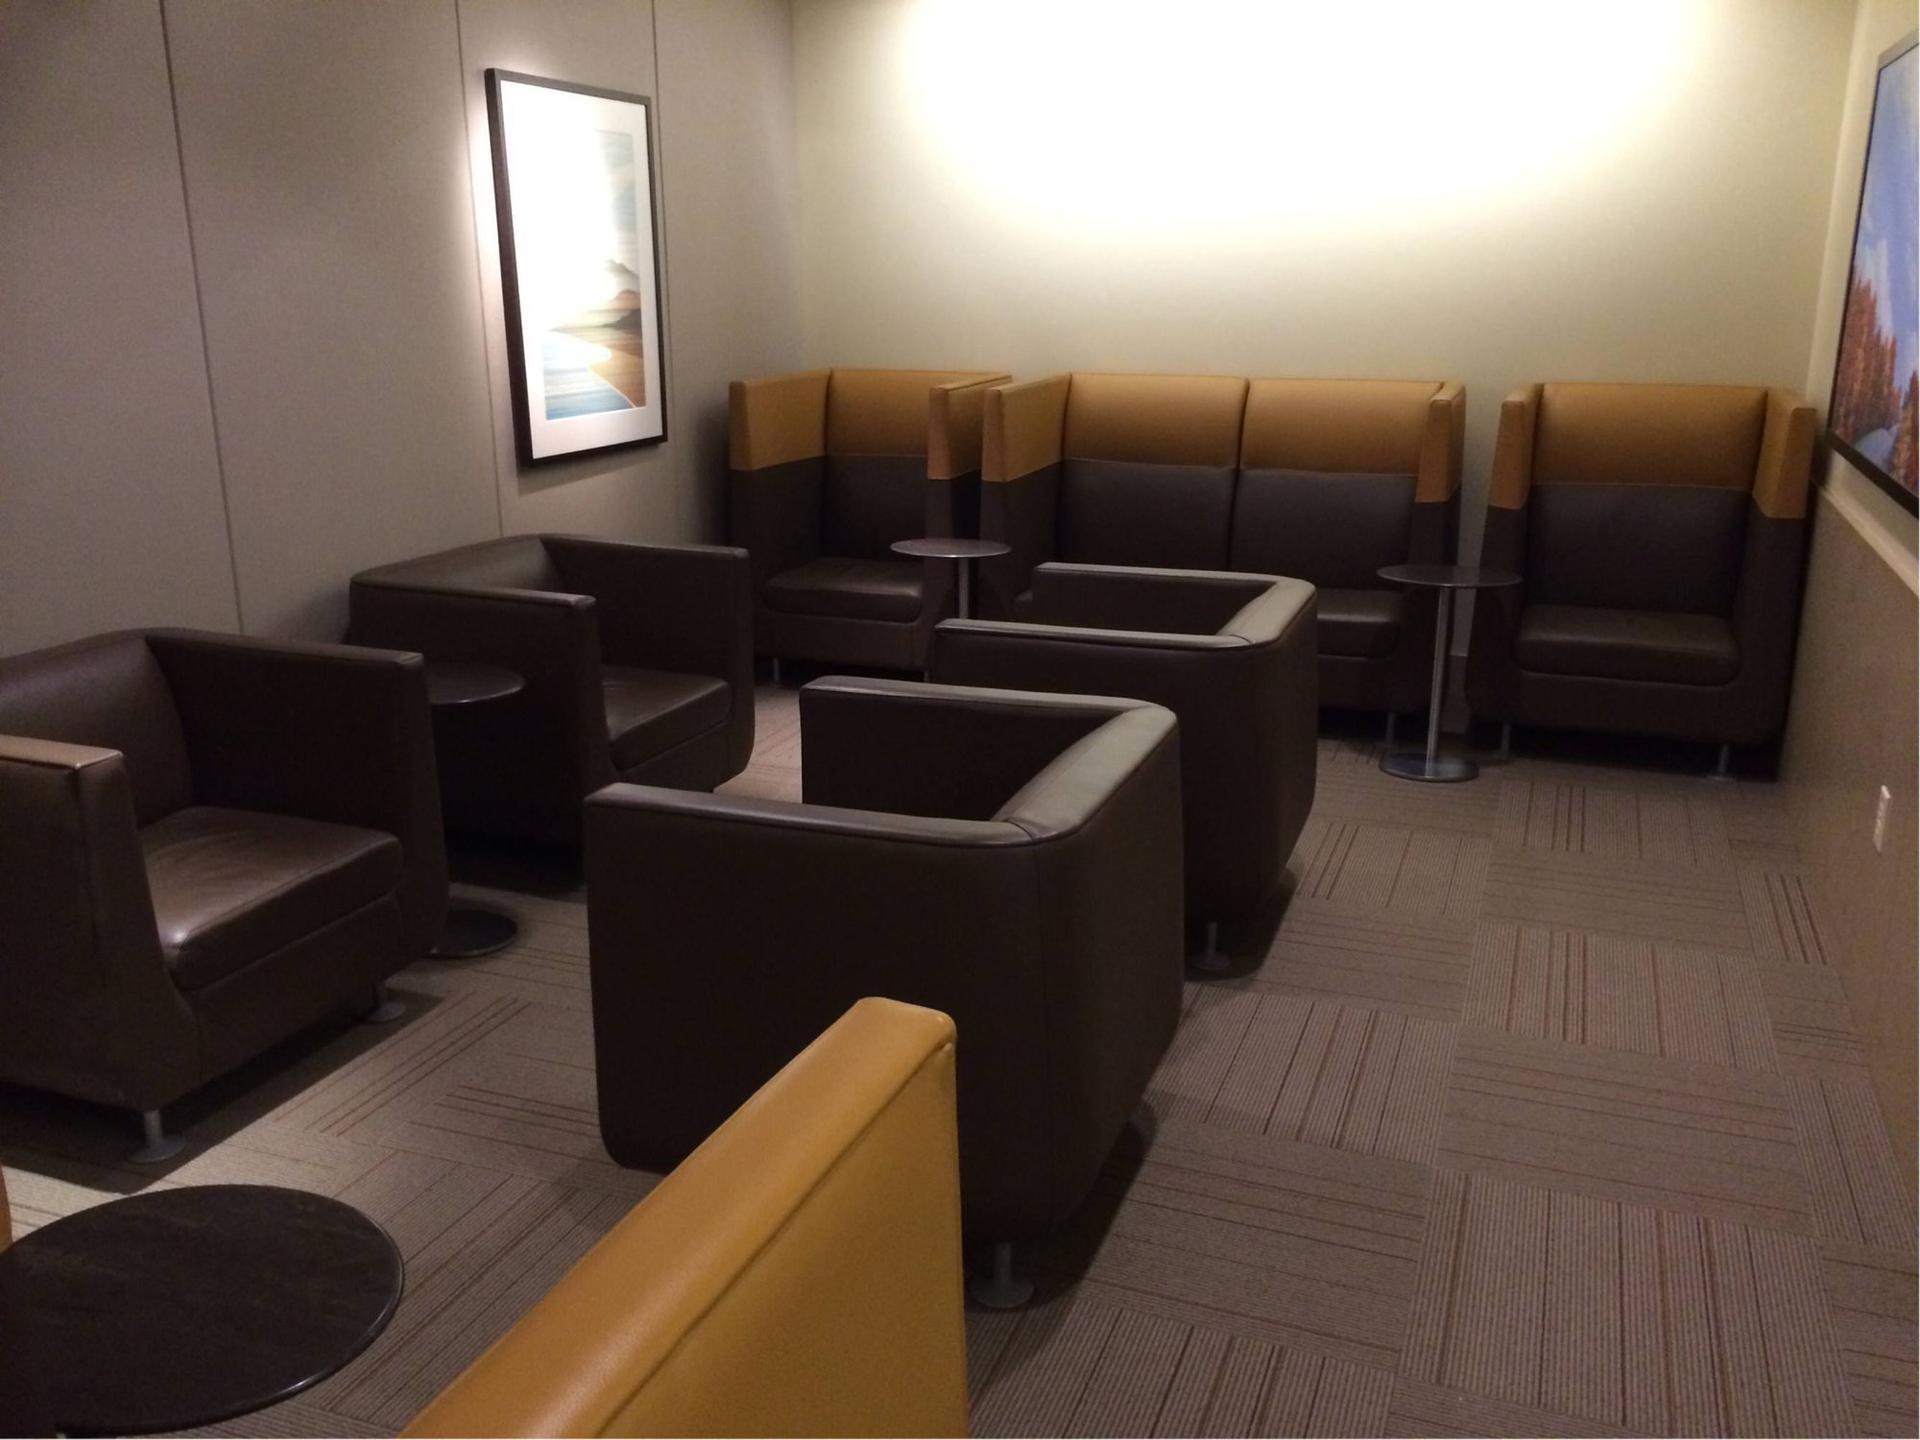 American Airlines Admirals Club image 5 of 31